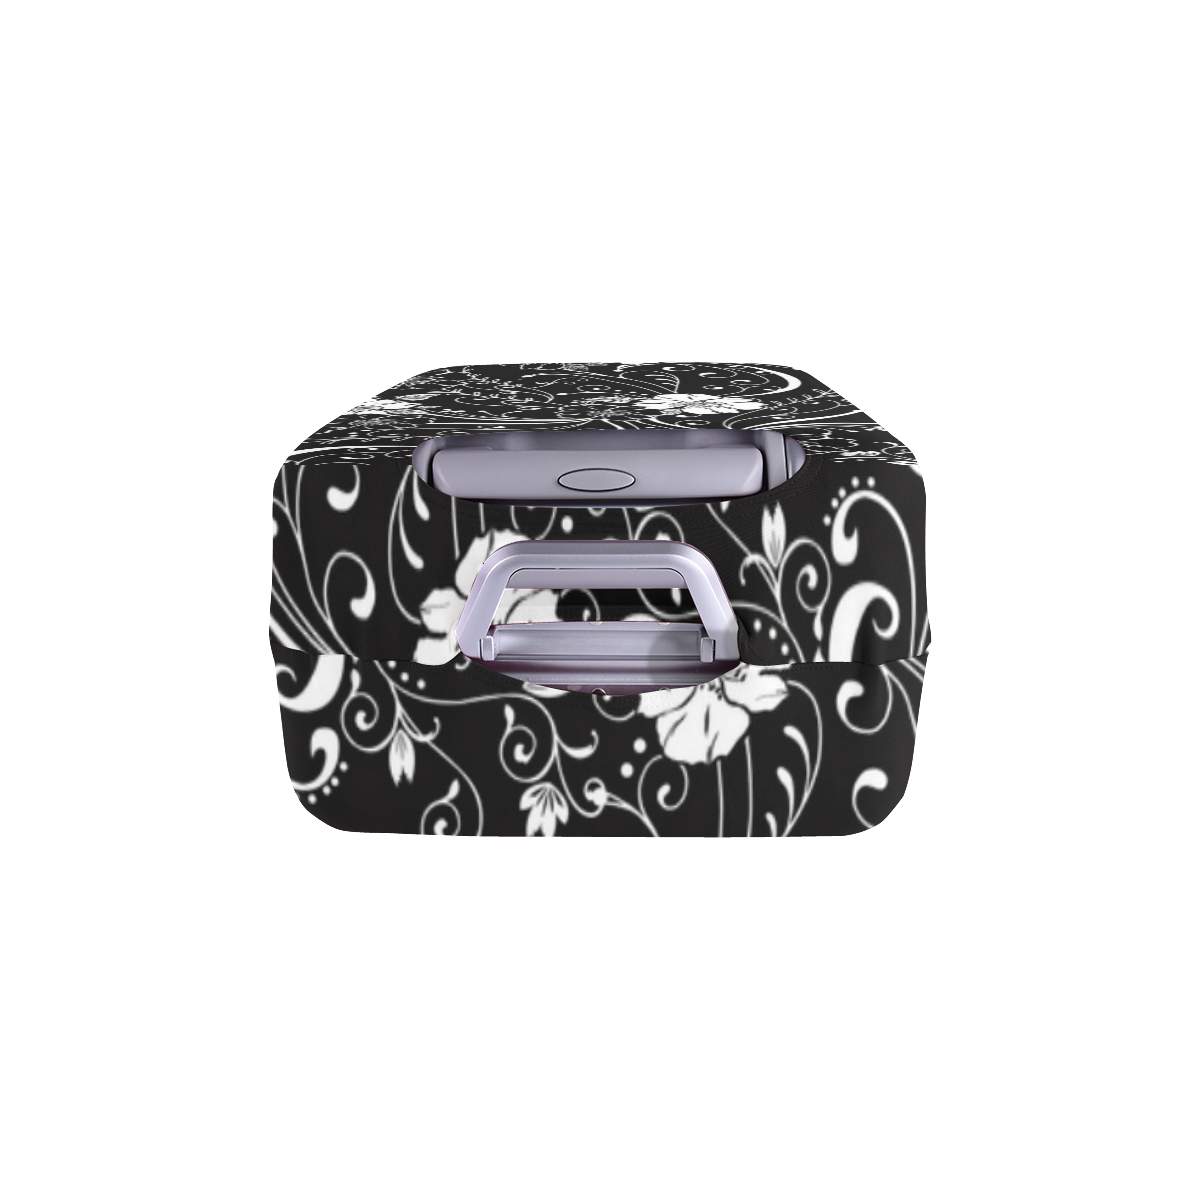 Luggage Cover Black White Flower Luggage Cover/Large 26"-28"